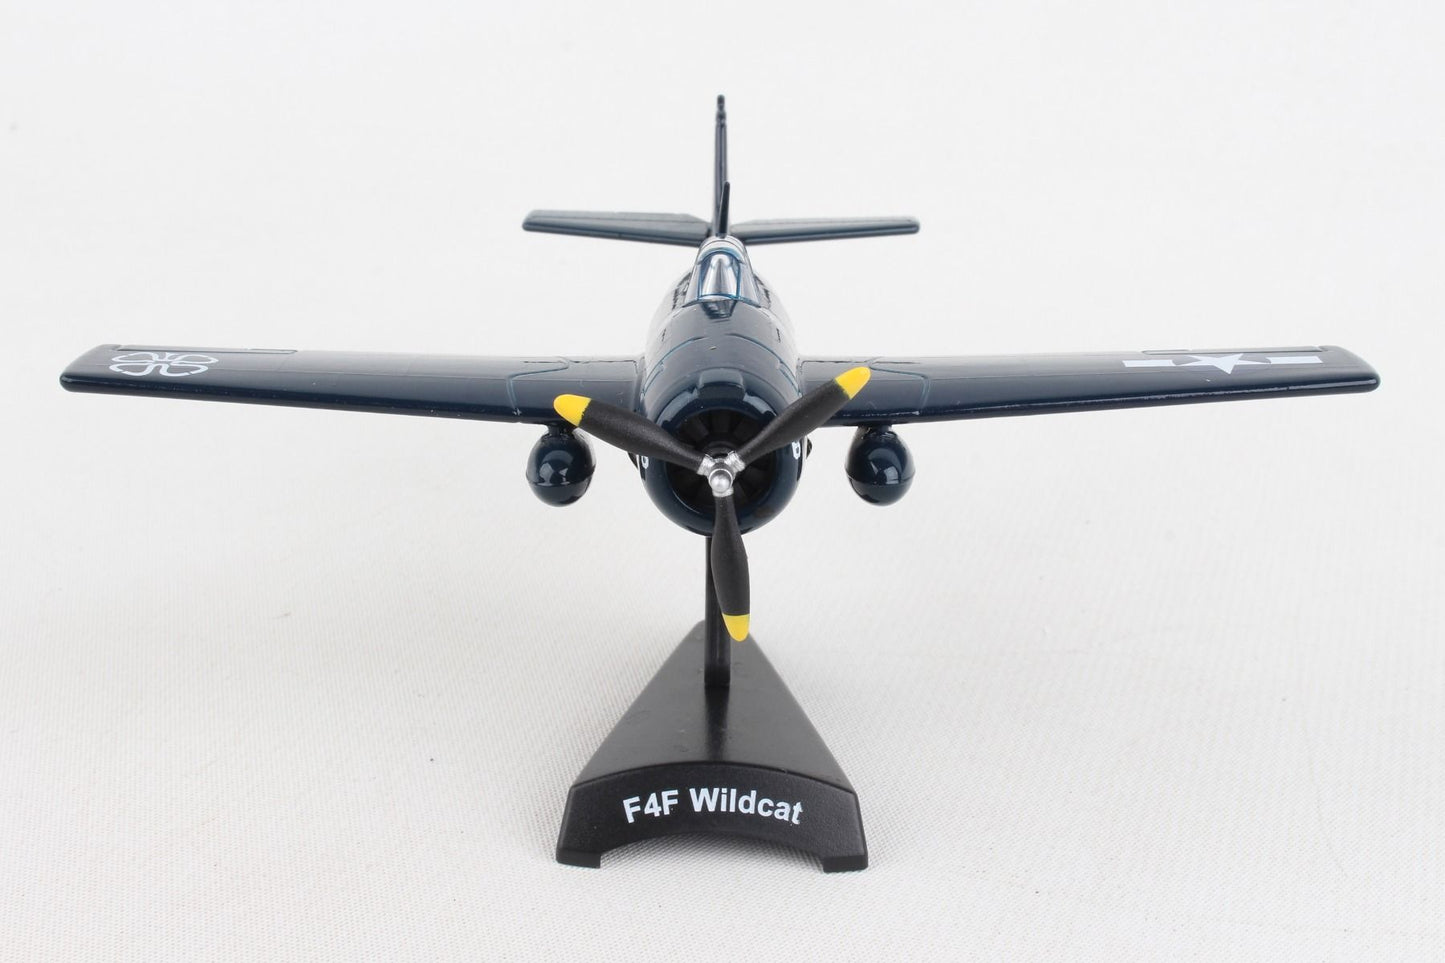 Postage Stamp F4F Wildcat PS5351-3 1:87 Scale